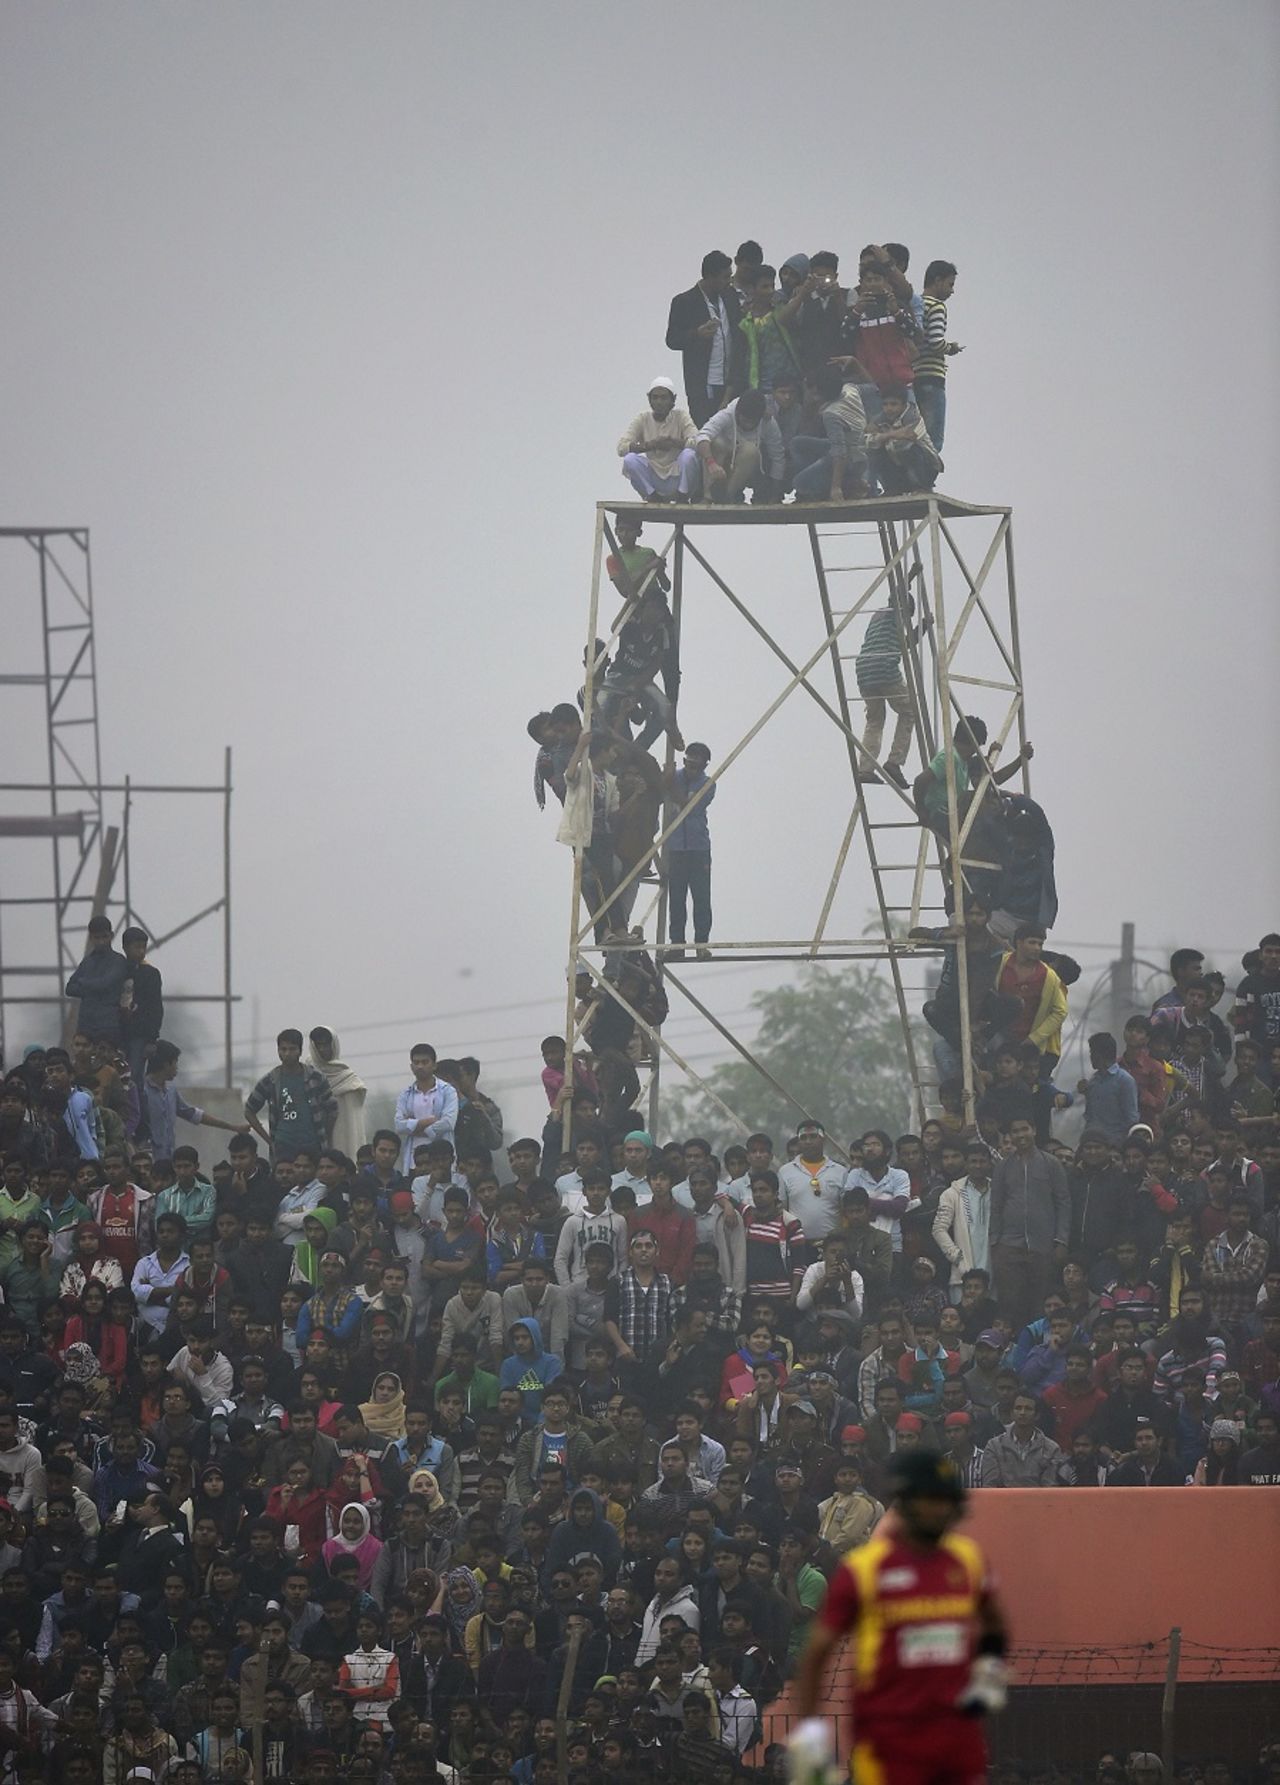 In towering form: The Khulna crowd makes their presence felt, Bangladesh v Zimbabwe, 3rd T20, Khulna, January 20, 2016